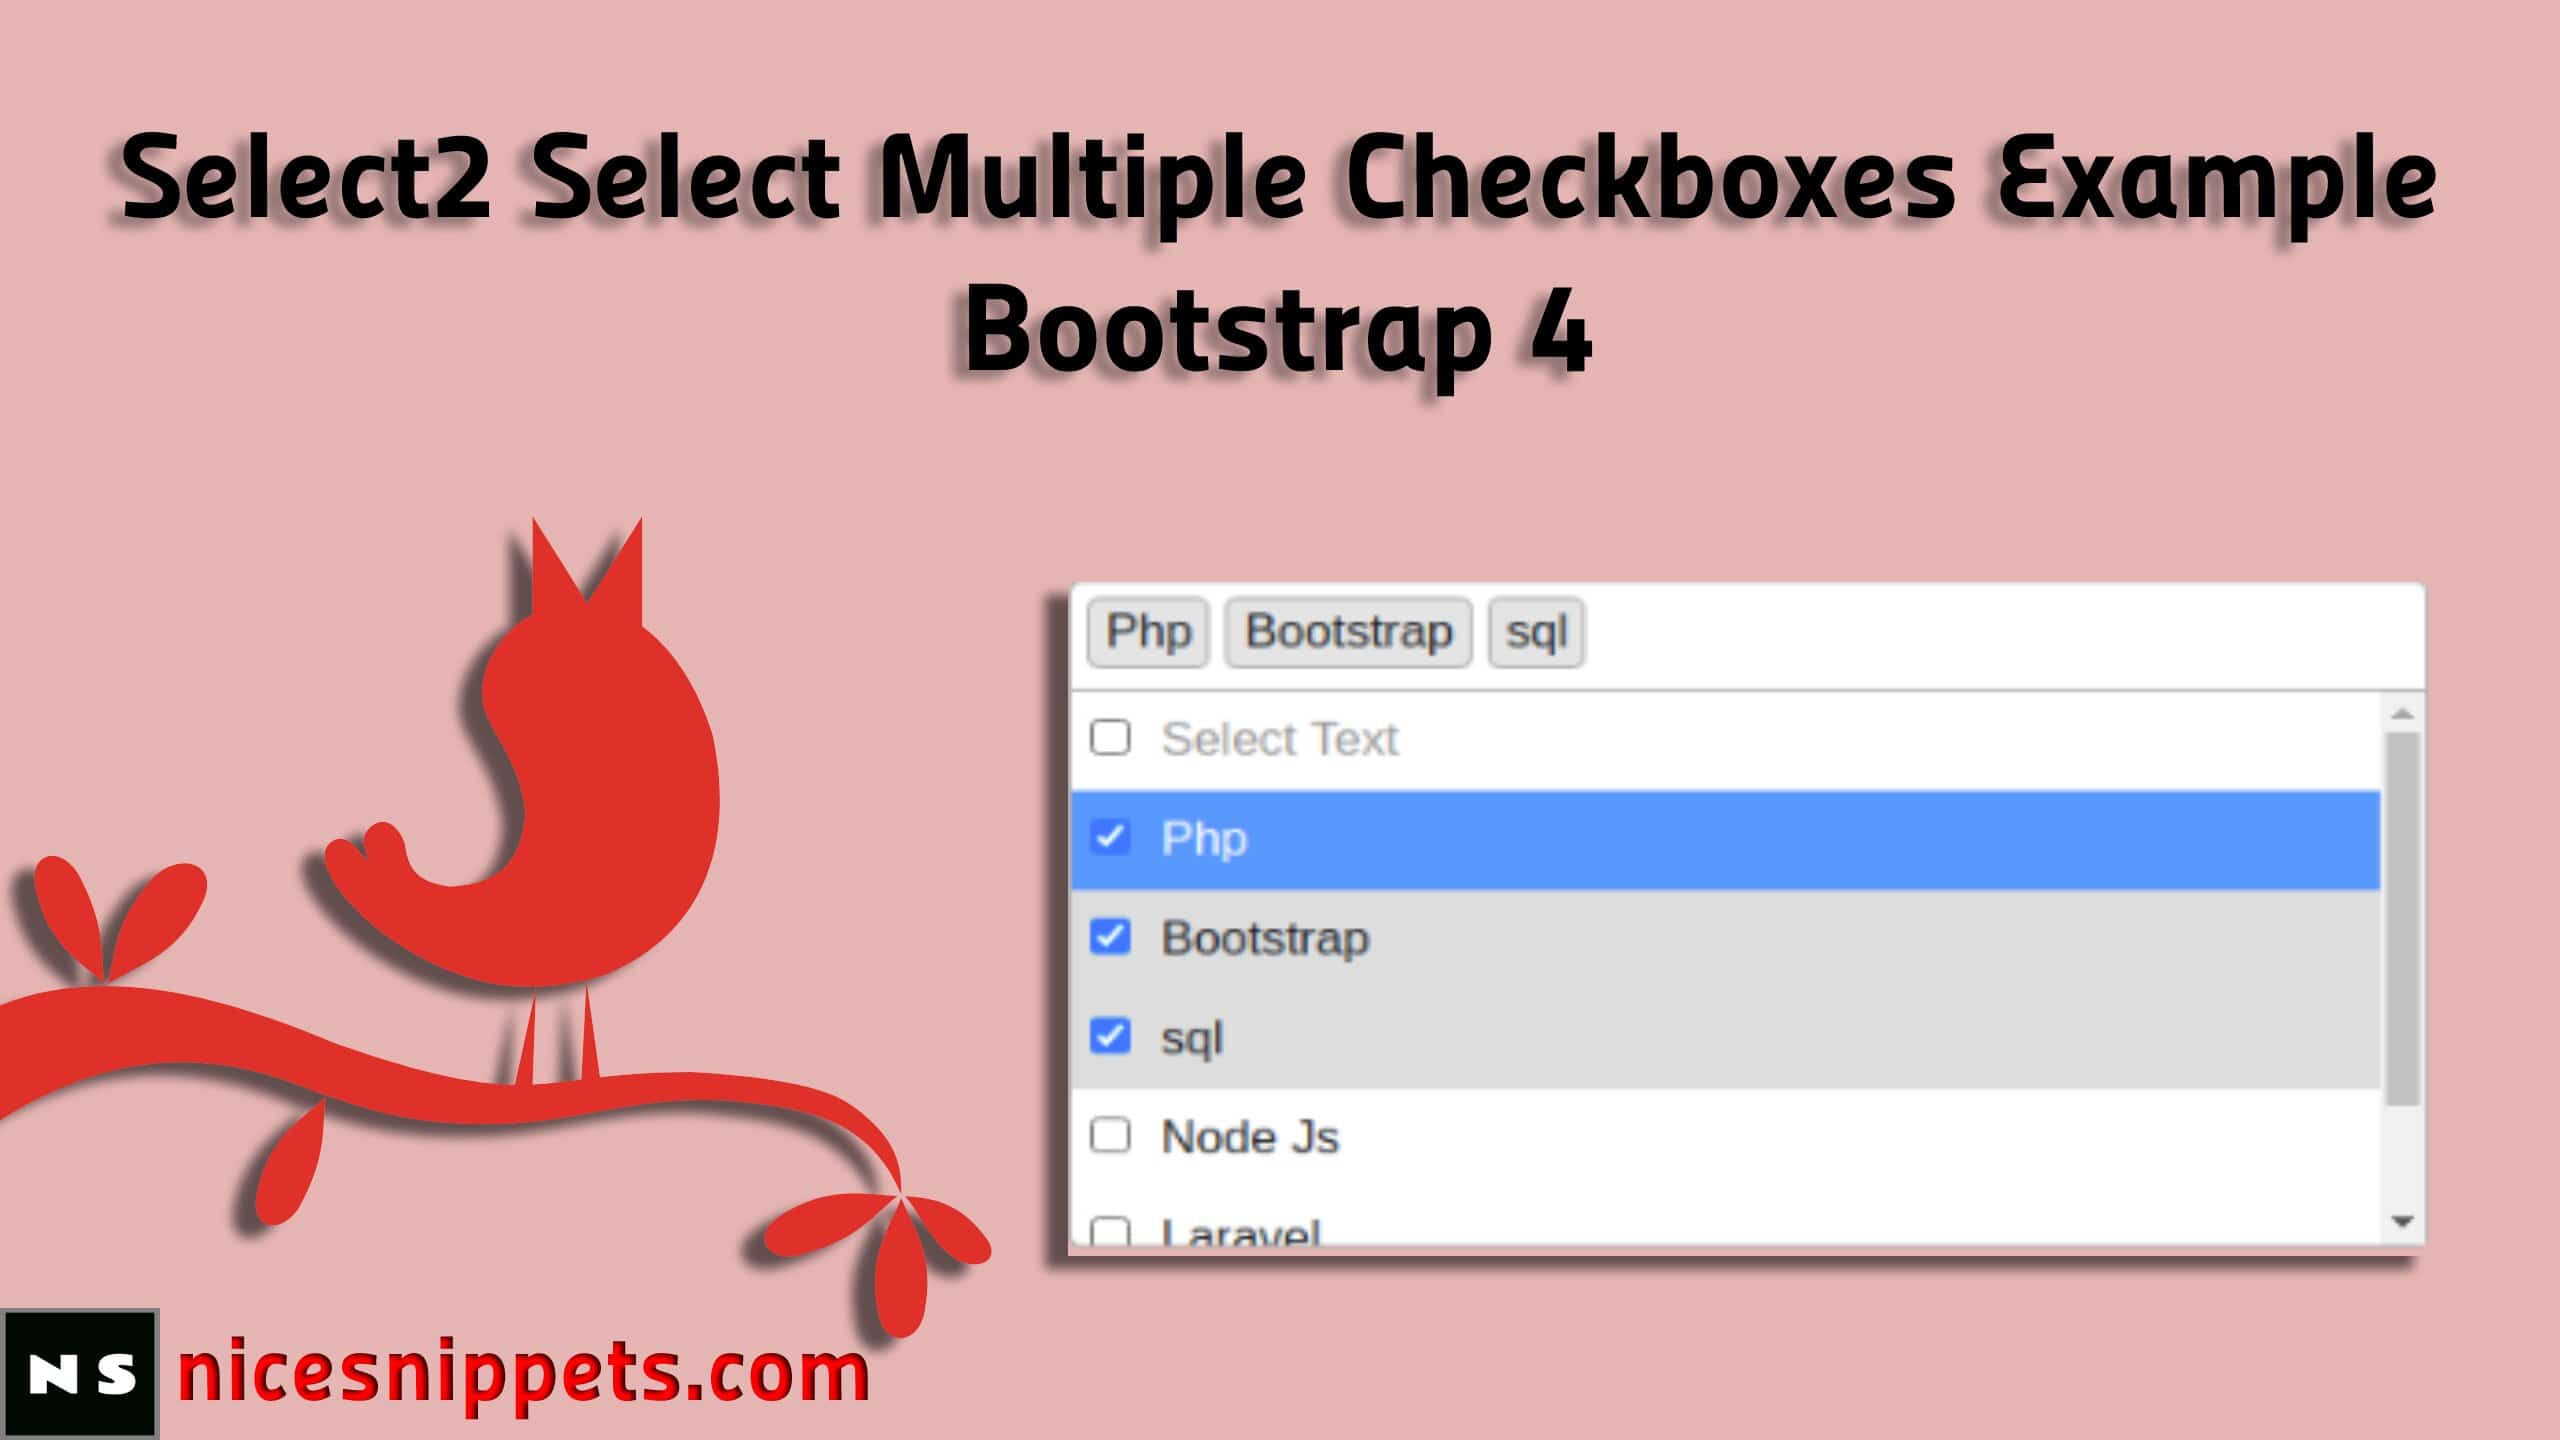 Select2 Select Multiple Checkboxes Example - Bootstrap 4